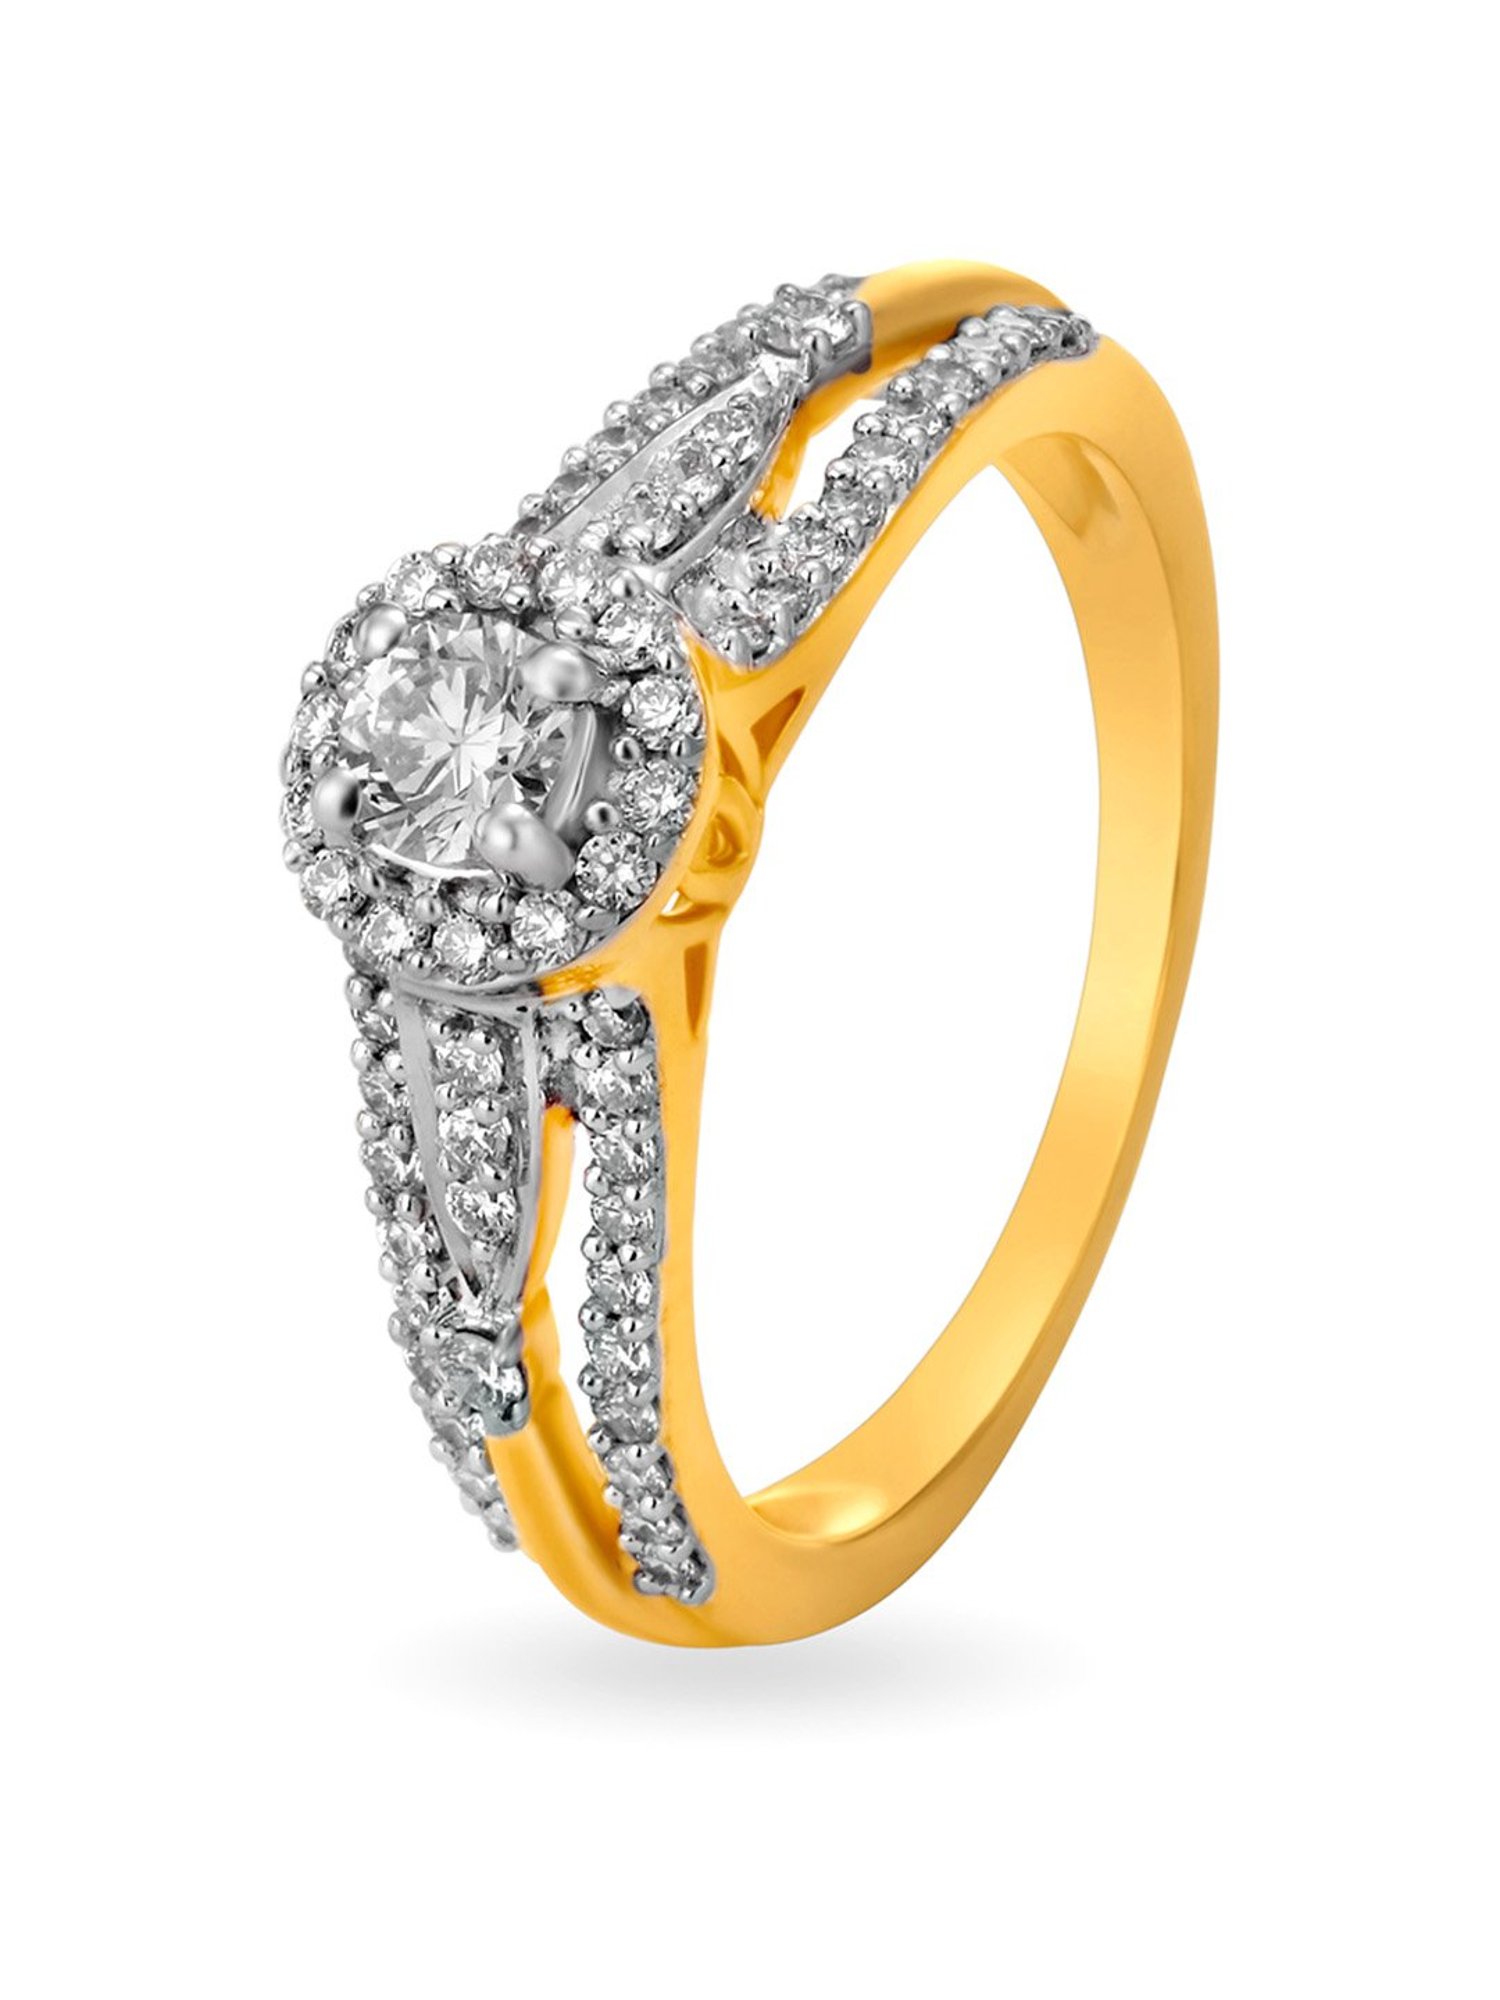 Kuololit 1.2CT Round Lab Grown Diamonds Rings for Women Solid 14K 10K 9K  Yellow Gold Marquise for Anniversary Wedding Engagement - AliExpress